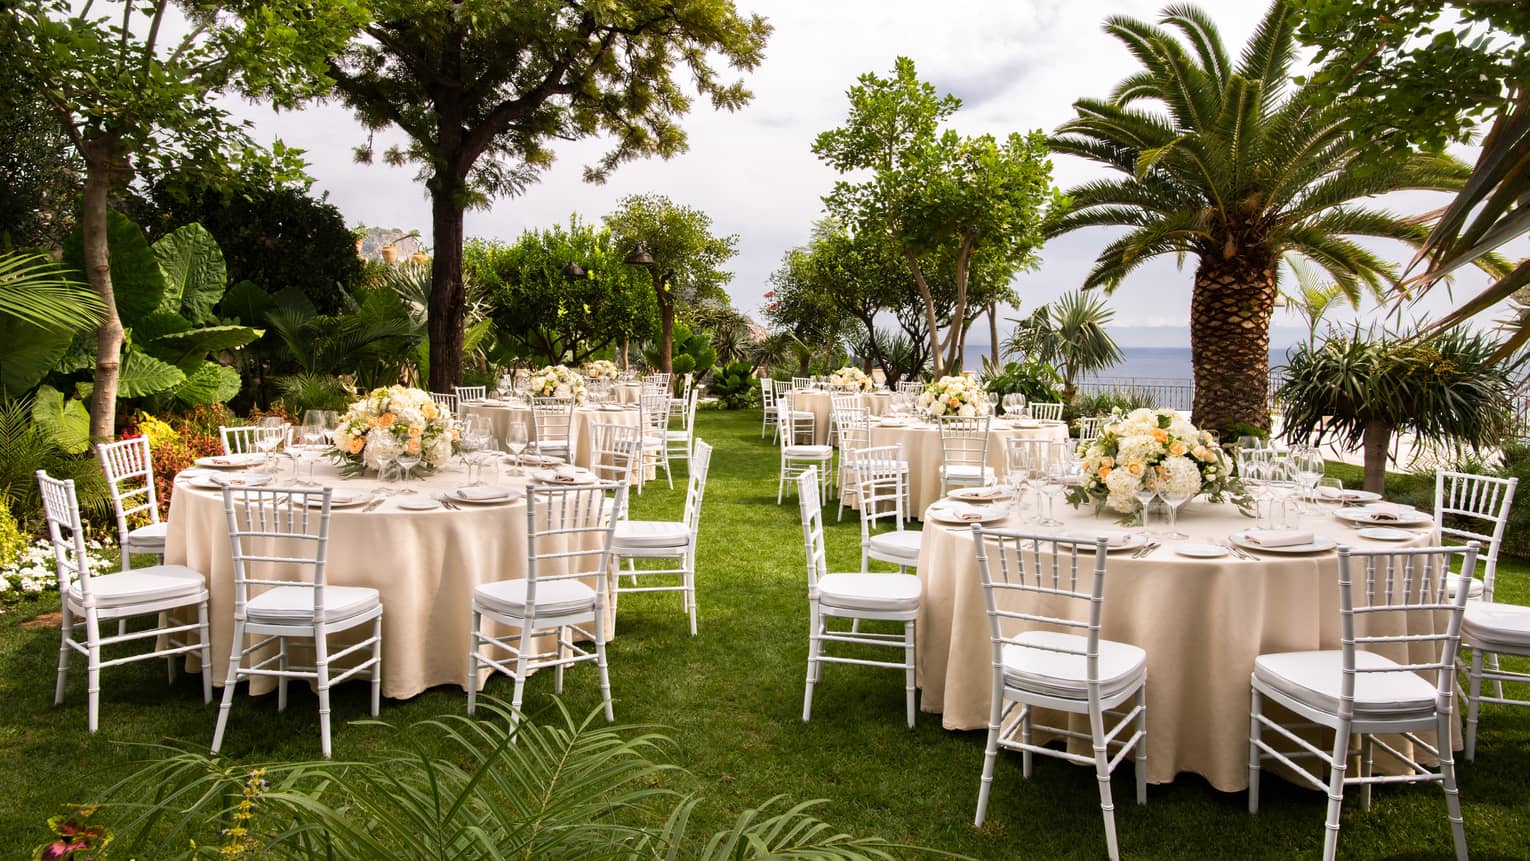 Outdoor wedding banquet with palm trees, sea view